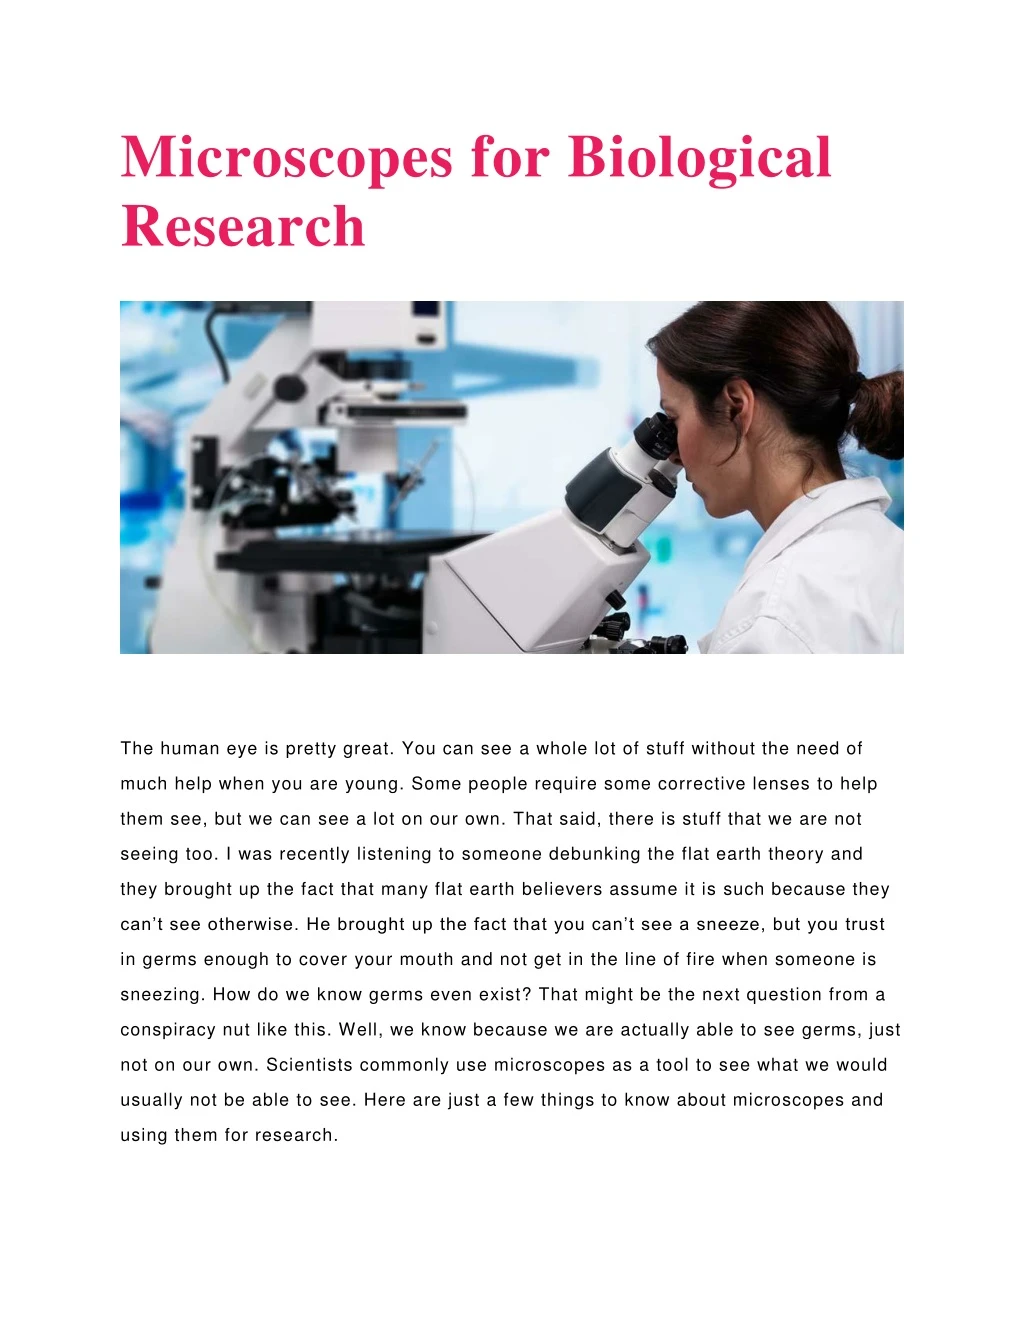 microscopes for biological research